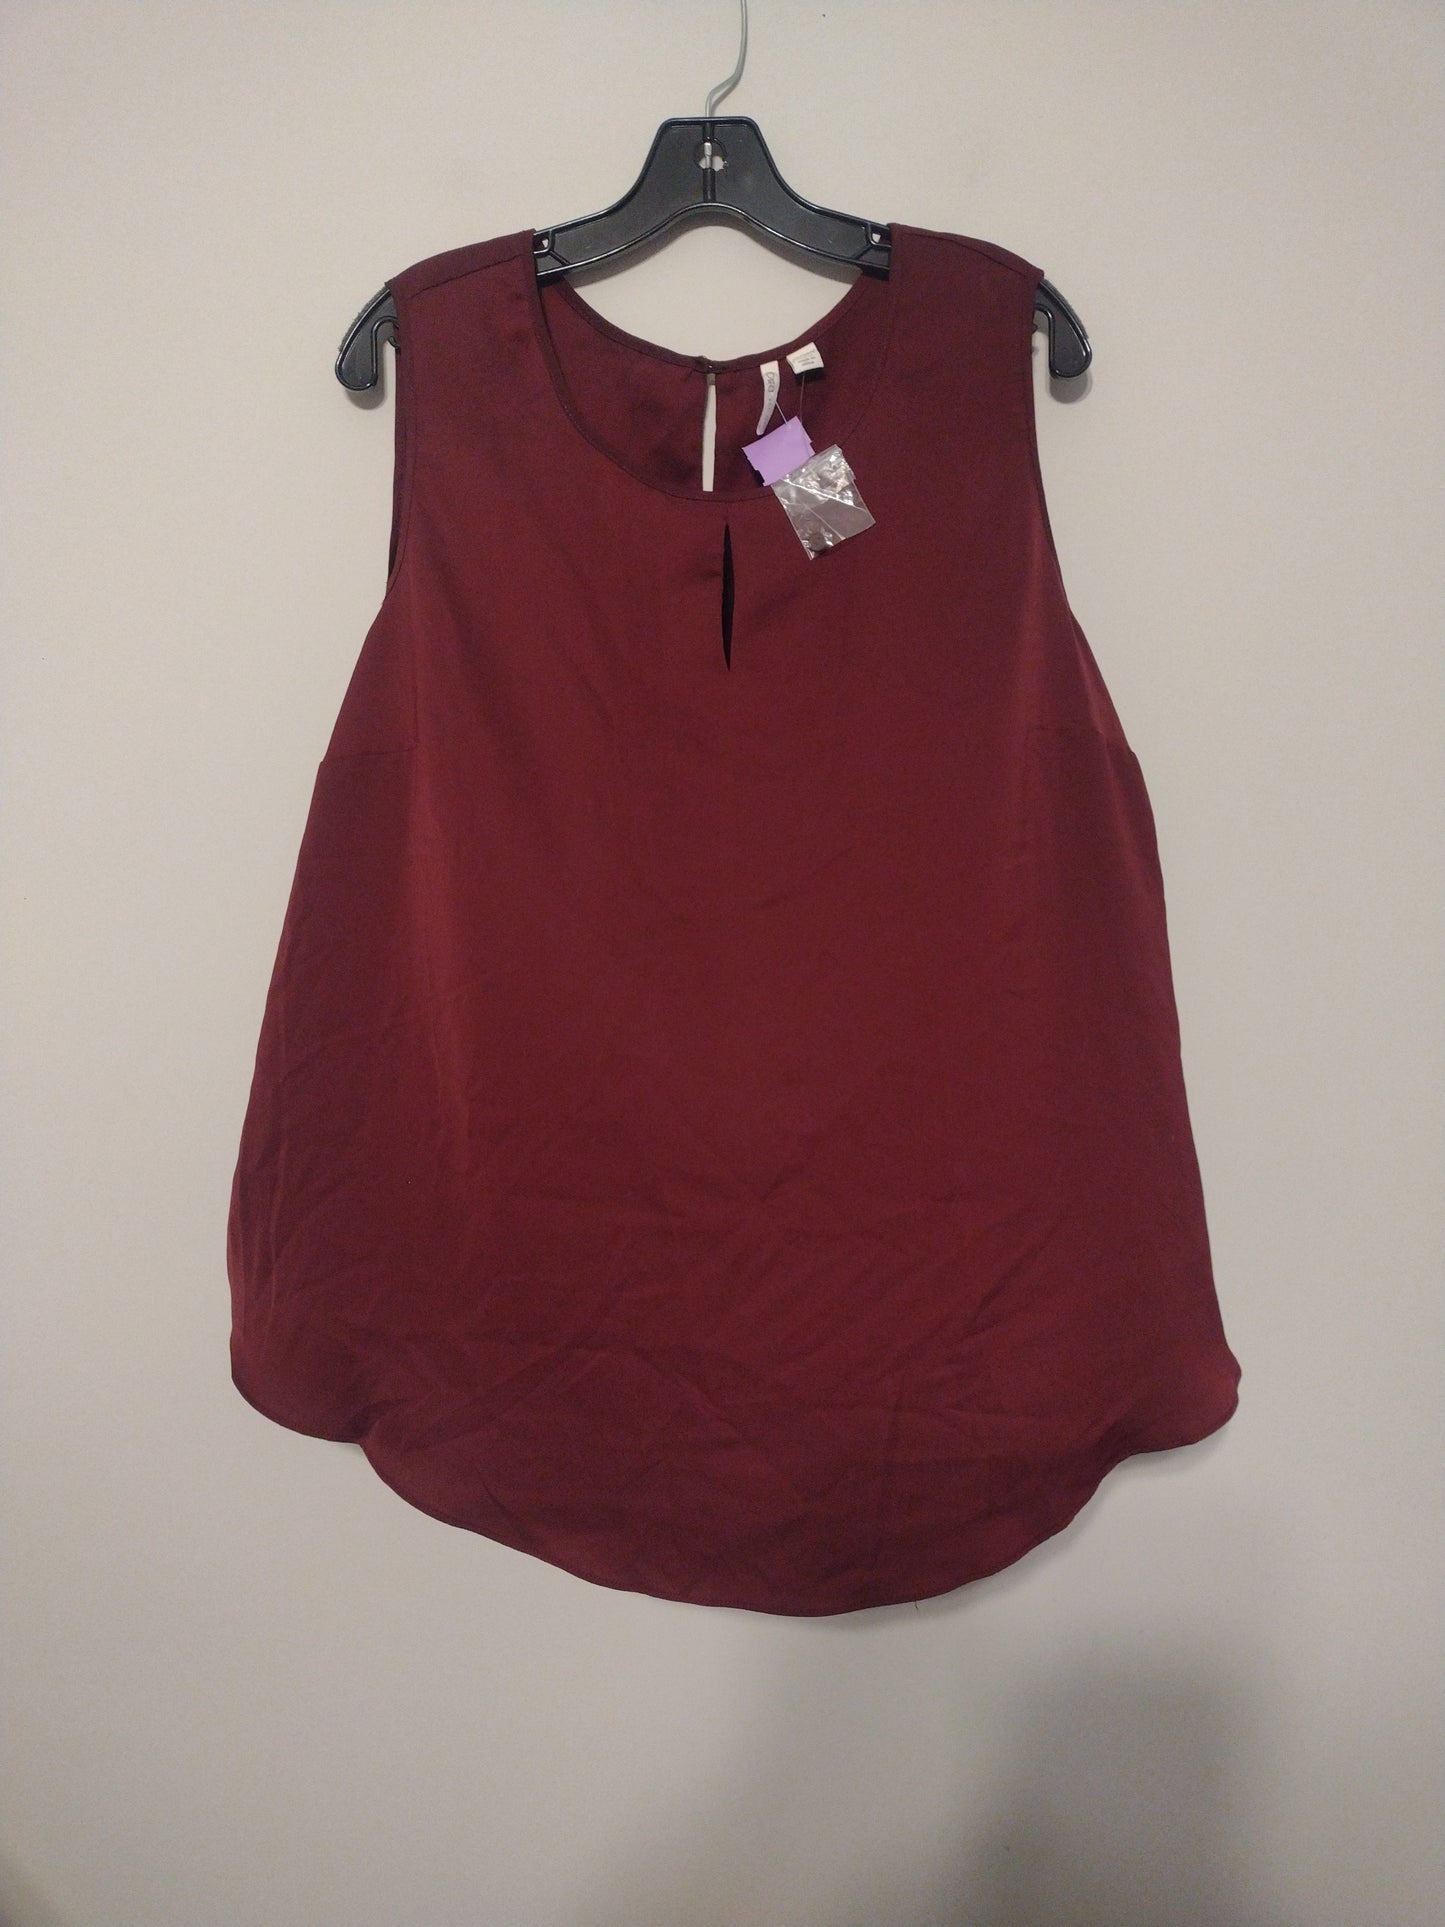 Top Sleeveless By Cato  Size: 2x